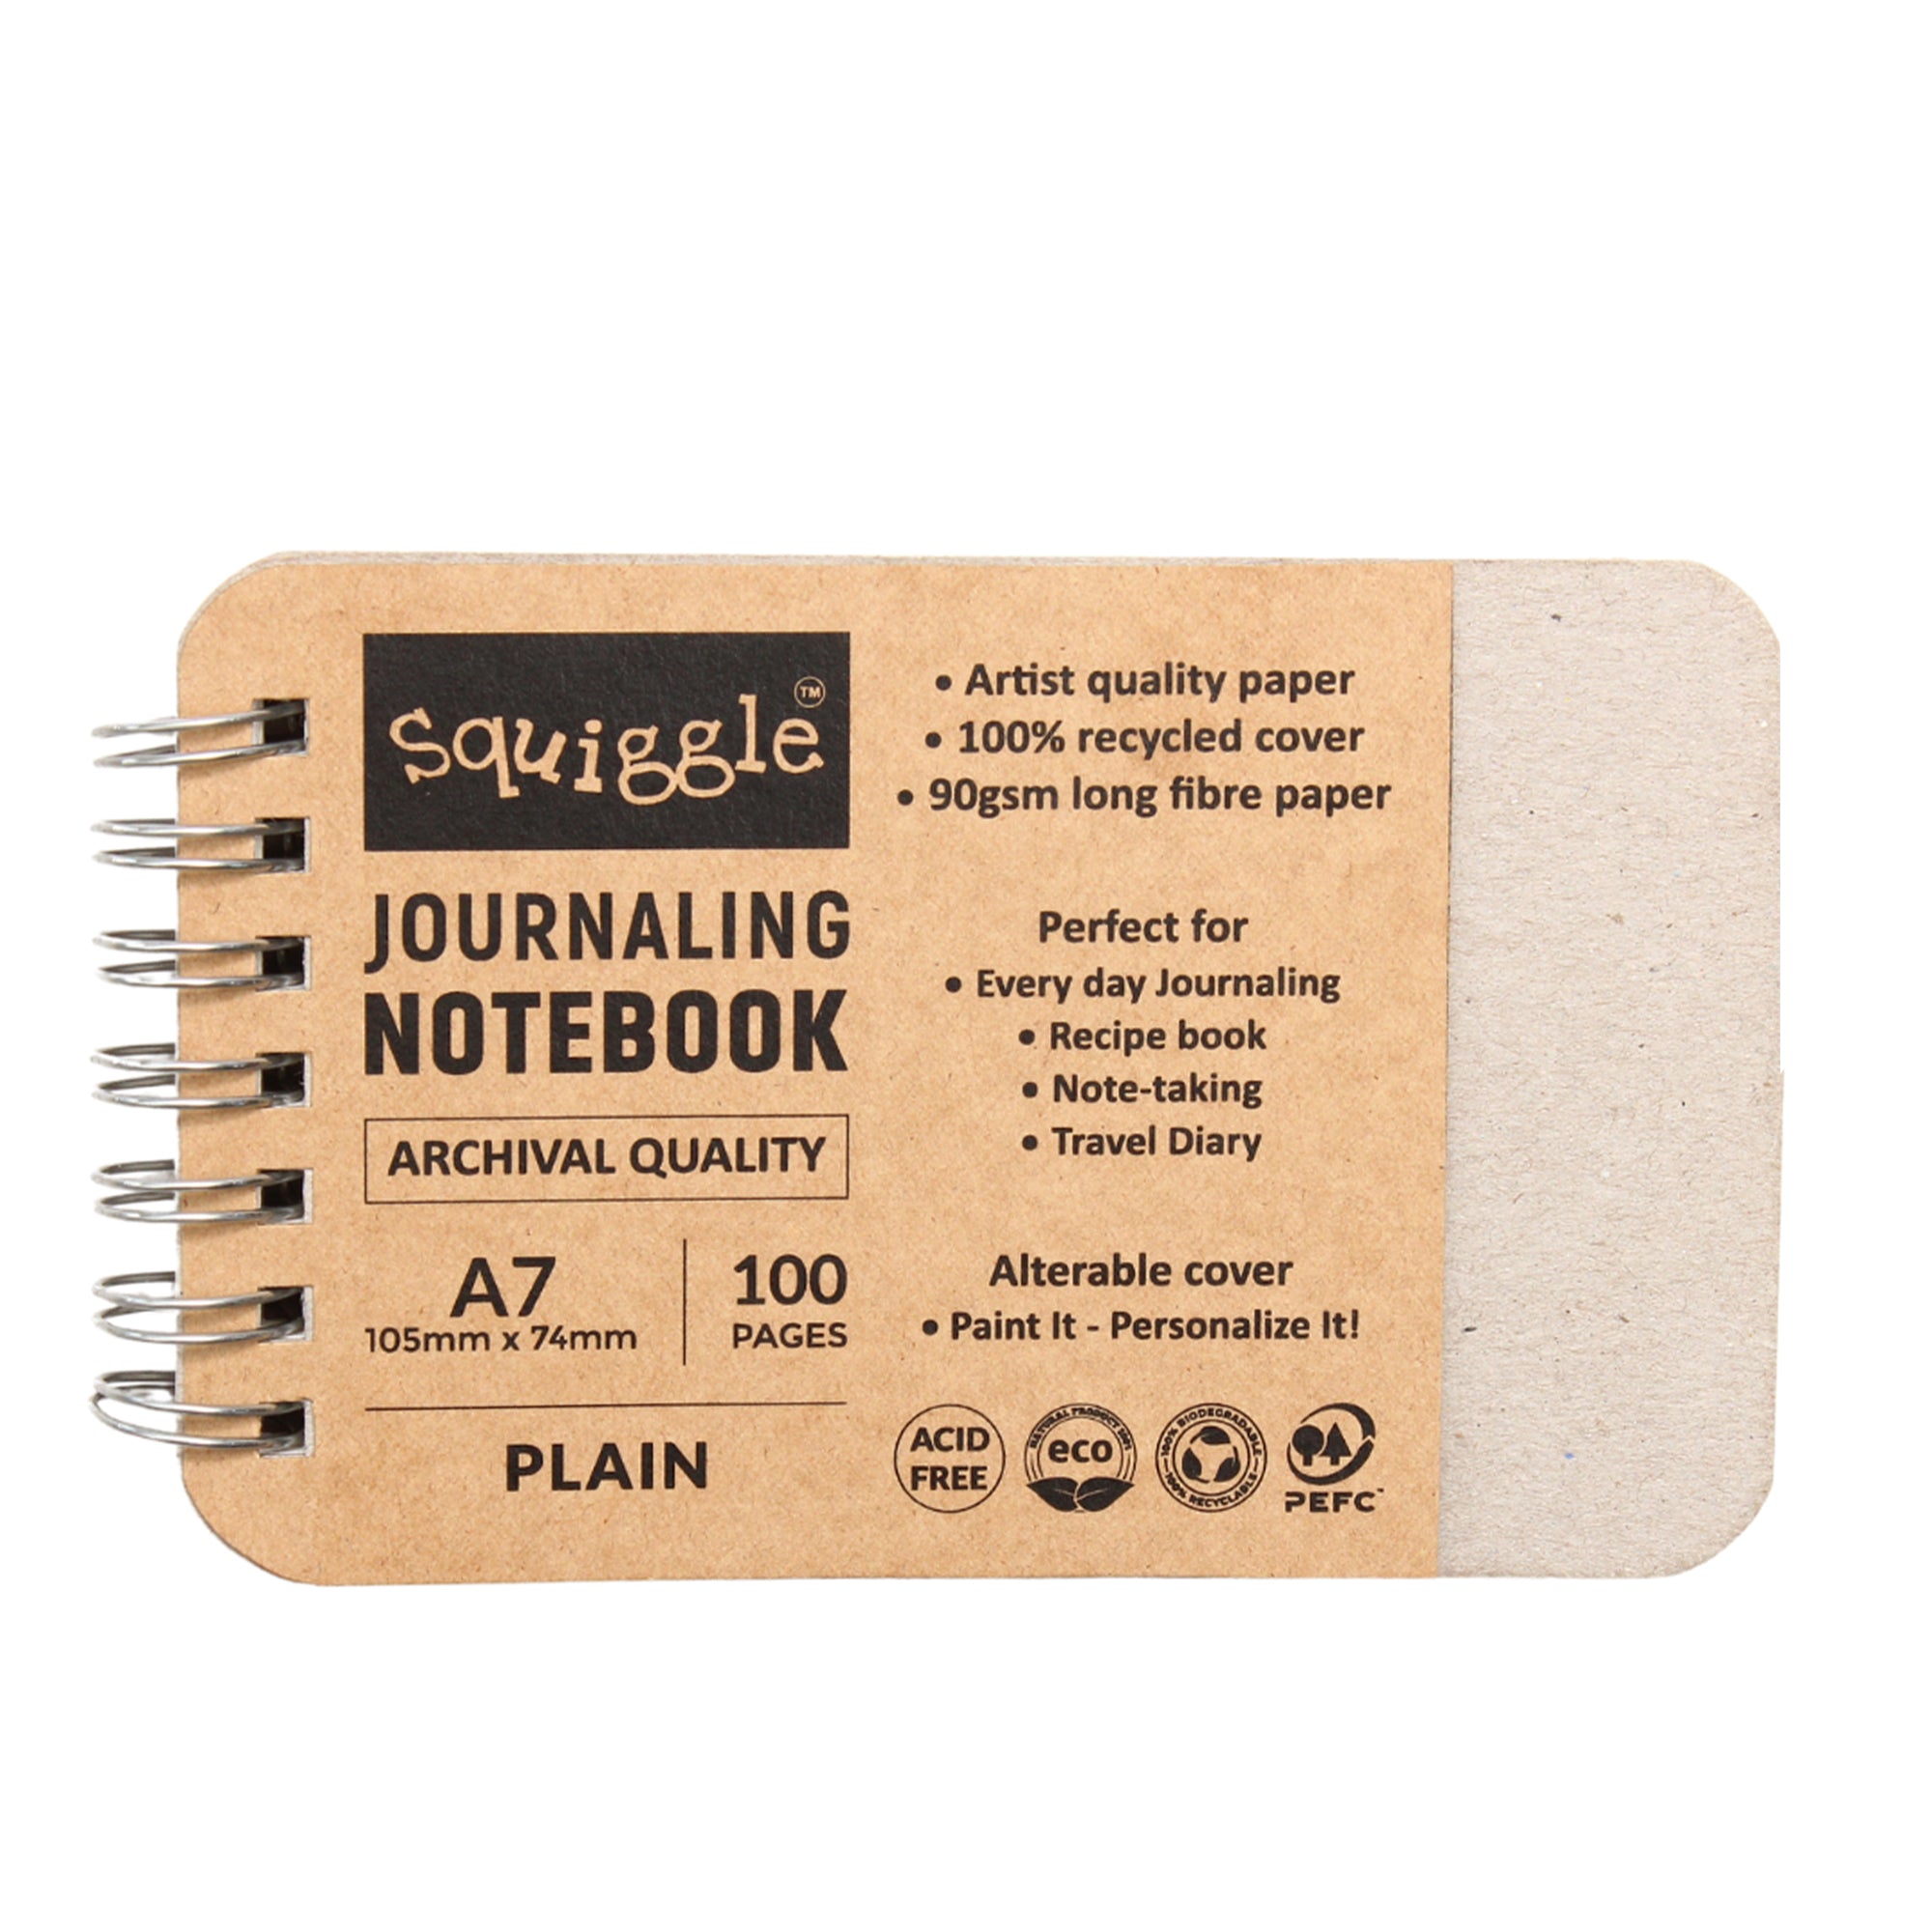 Journaling Notebook Premium Quality A7 Plain 90Gsm Wiro Squiggle 100Pages Lb